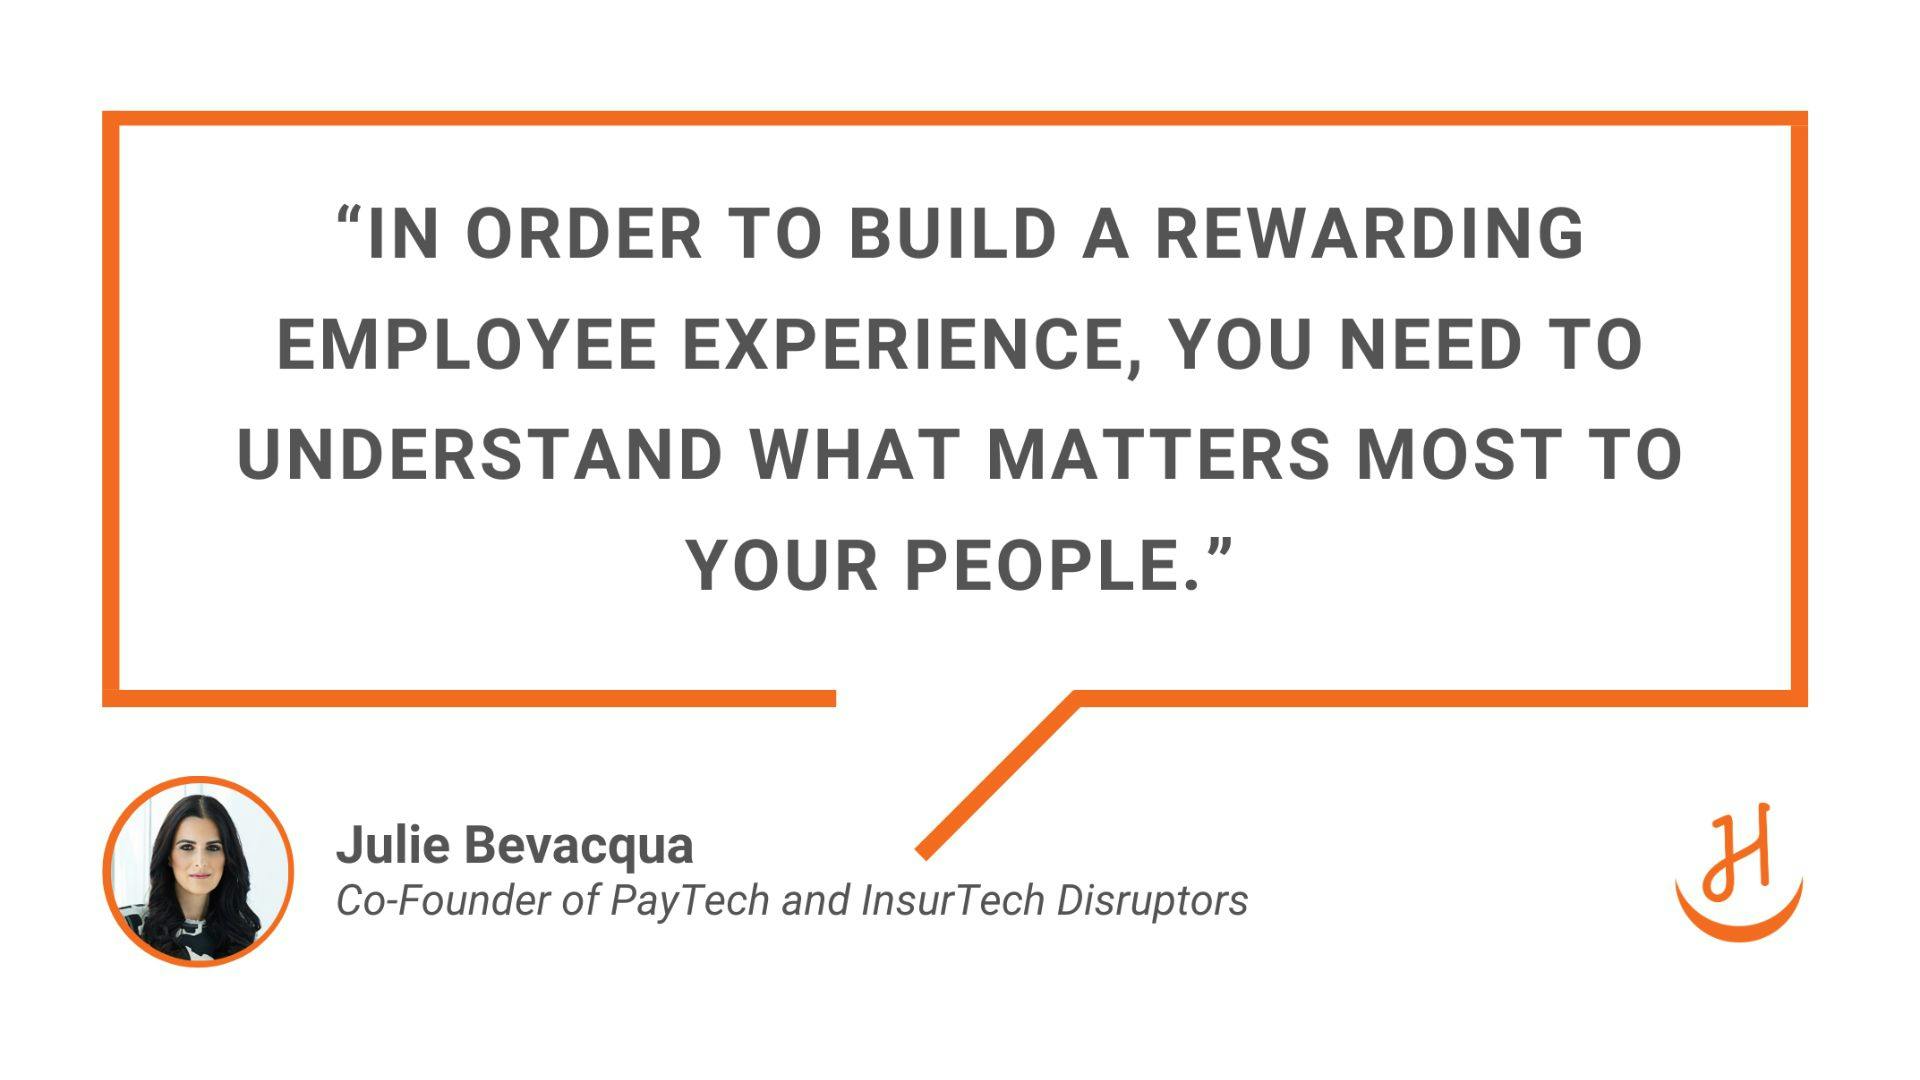  “In order to build a rewarding employee experience, you need to understand what matters most to your people.” Quote by Julie Bevacqua, Co-Founder of PayTech and InsurTech Disruptors